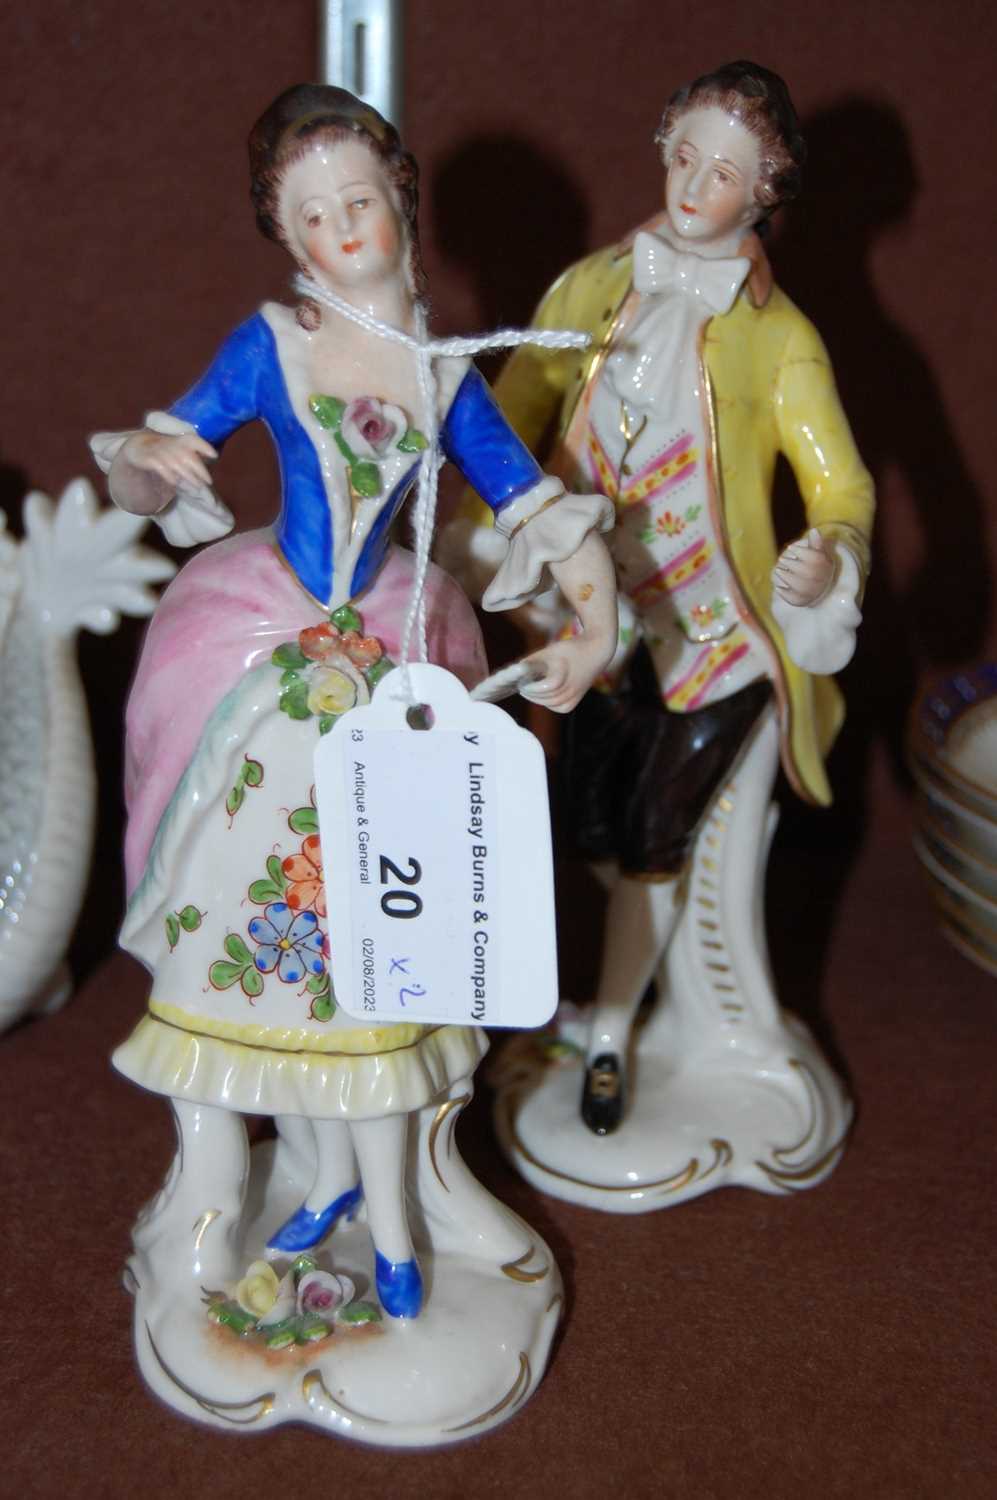 A pair of late 19th/ early 20th century Continental porcelain figure groups, 19th century male